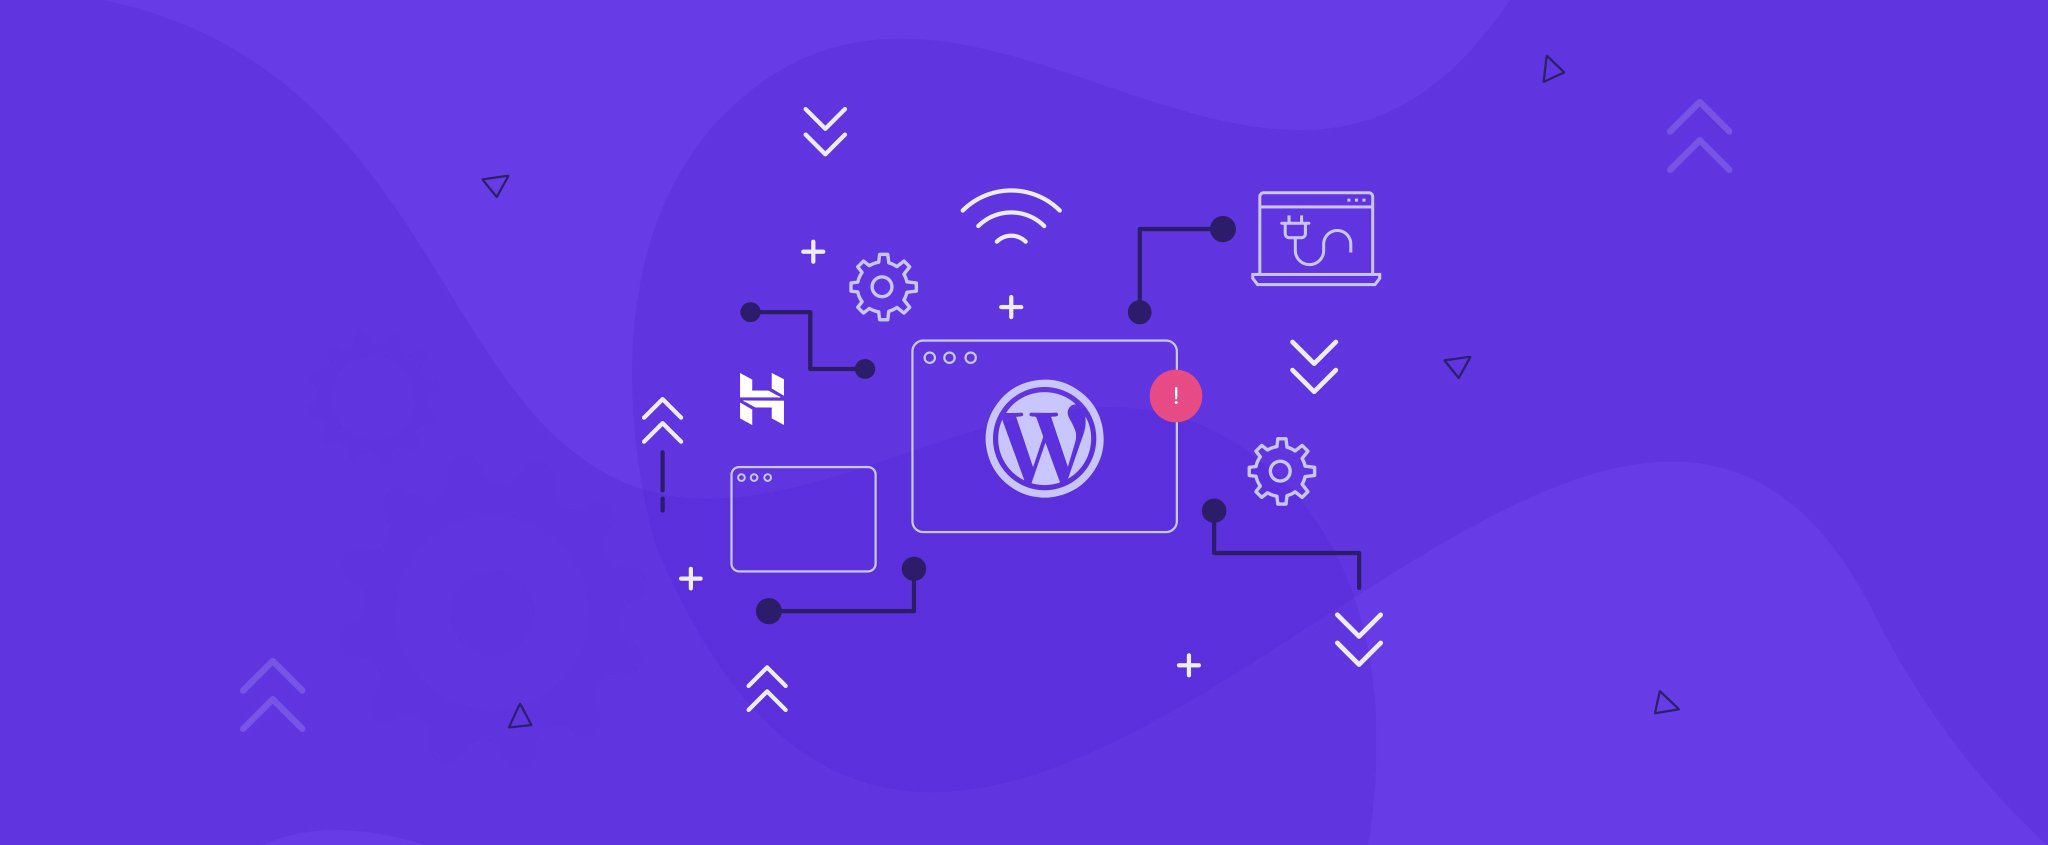 WordPress Pattern Creator Is Now Available